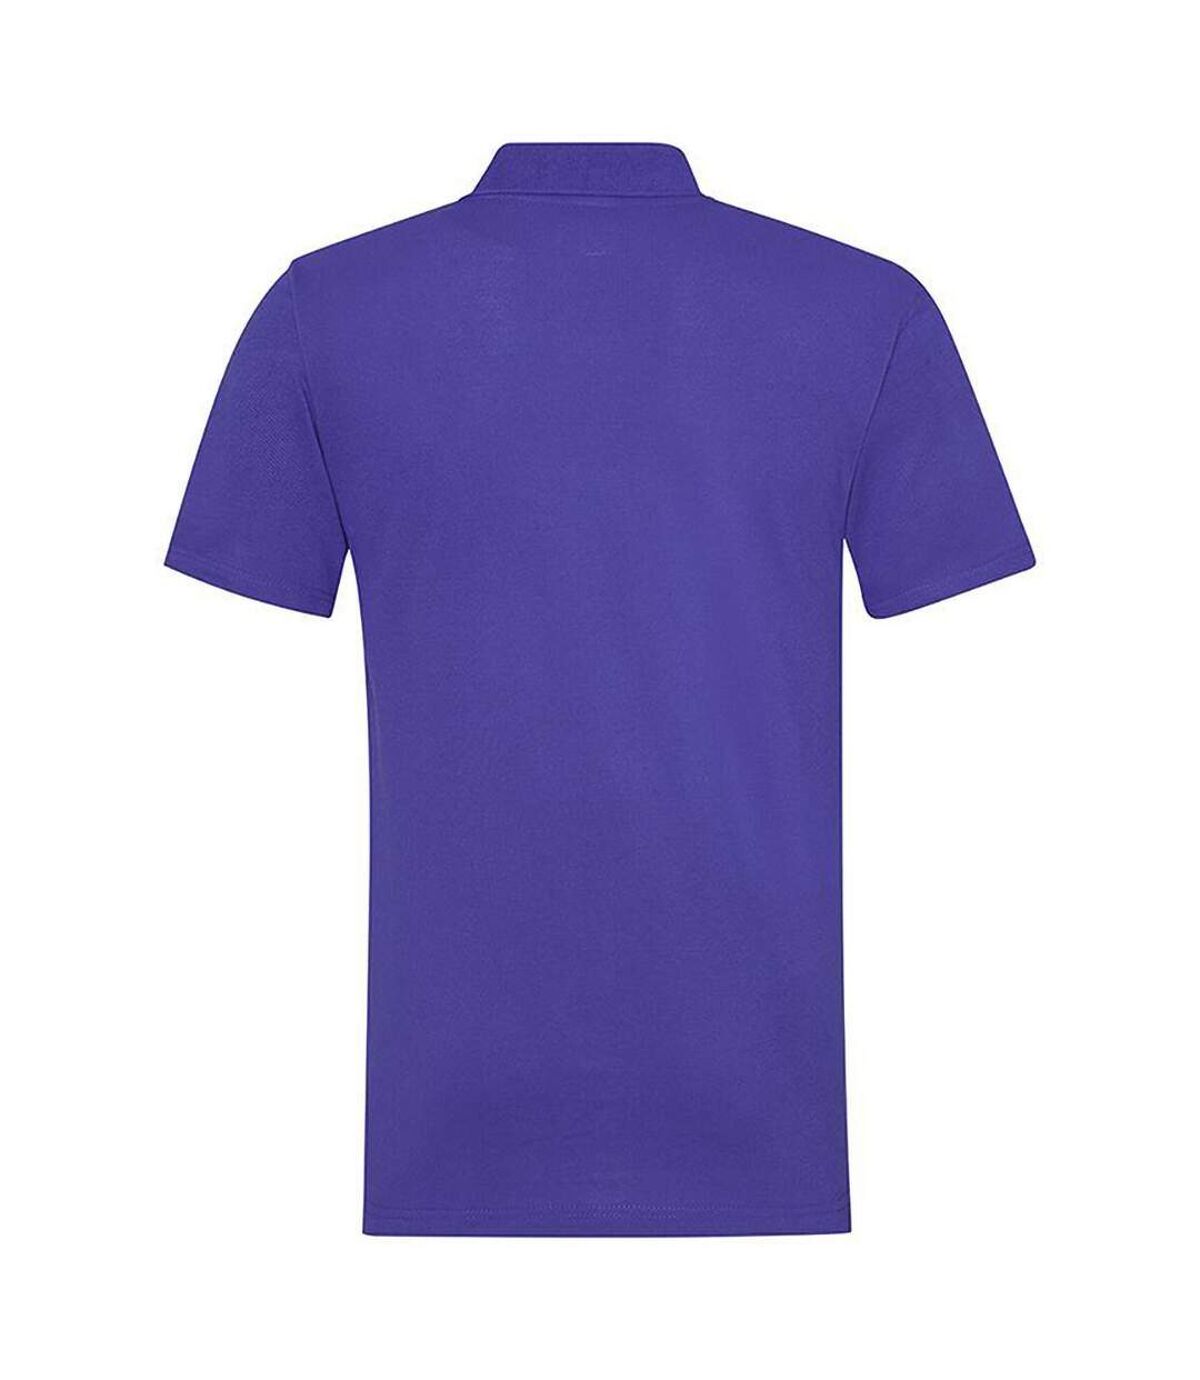 RTY Workwear Mens Pique Knit Heavyweight Polo Shirt (S-10XL) / Extra Large Sizes (Purple)